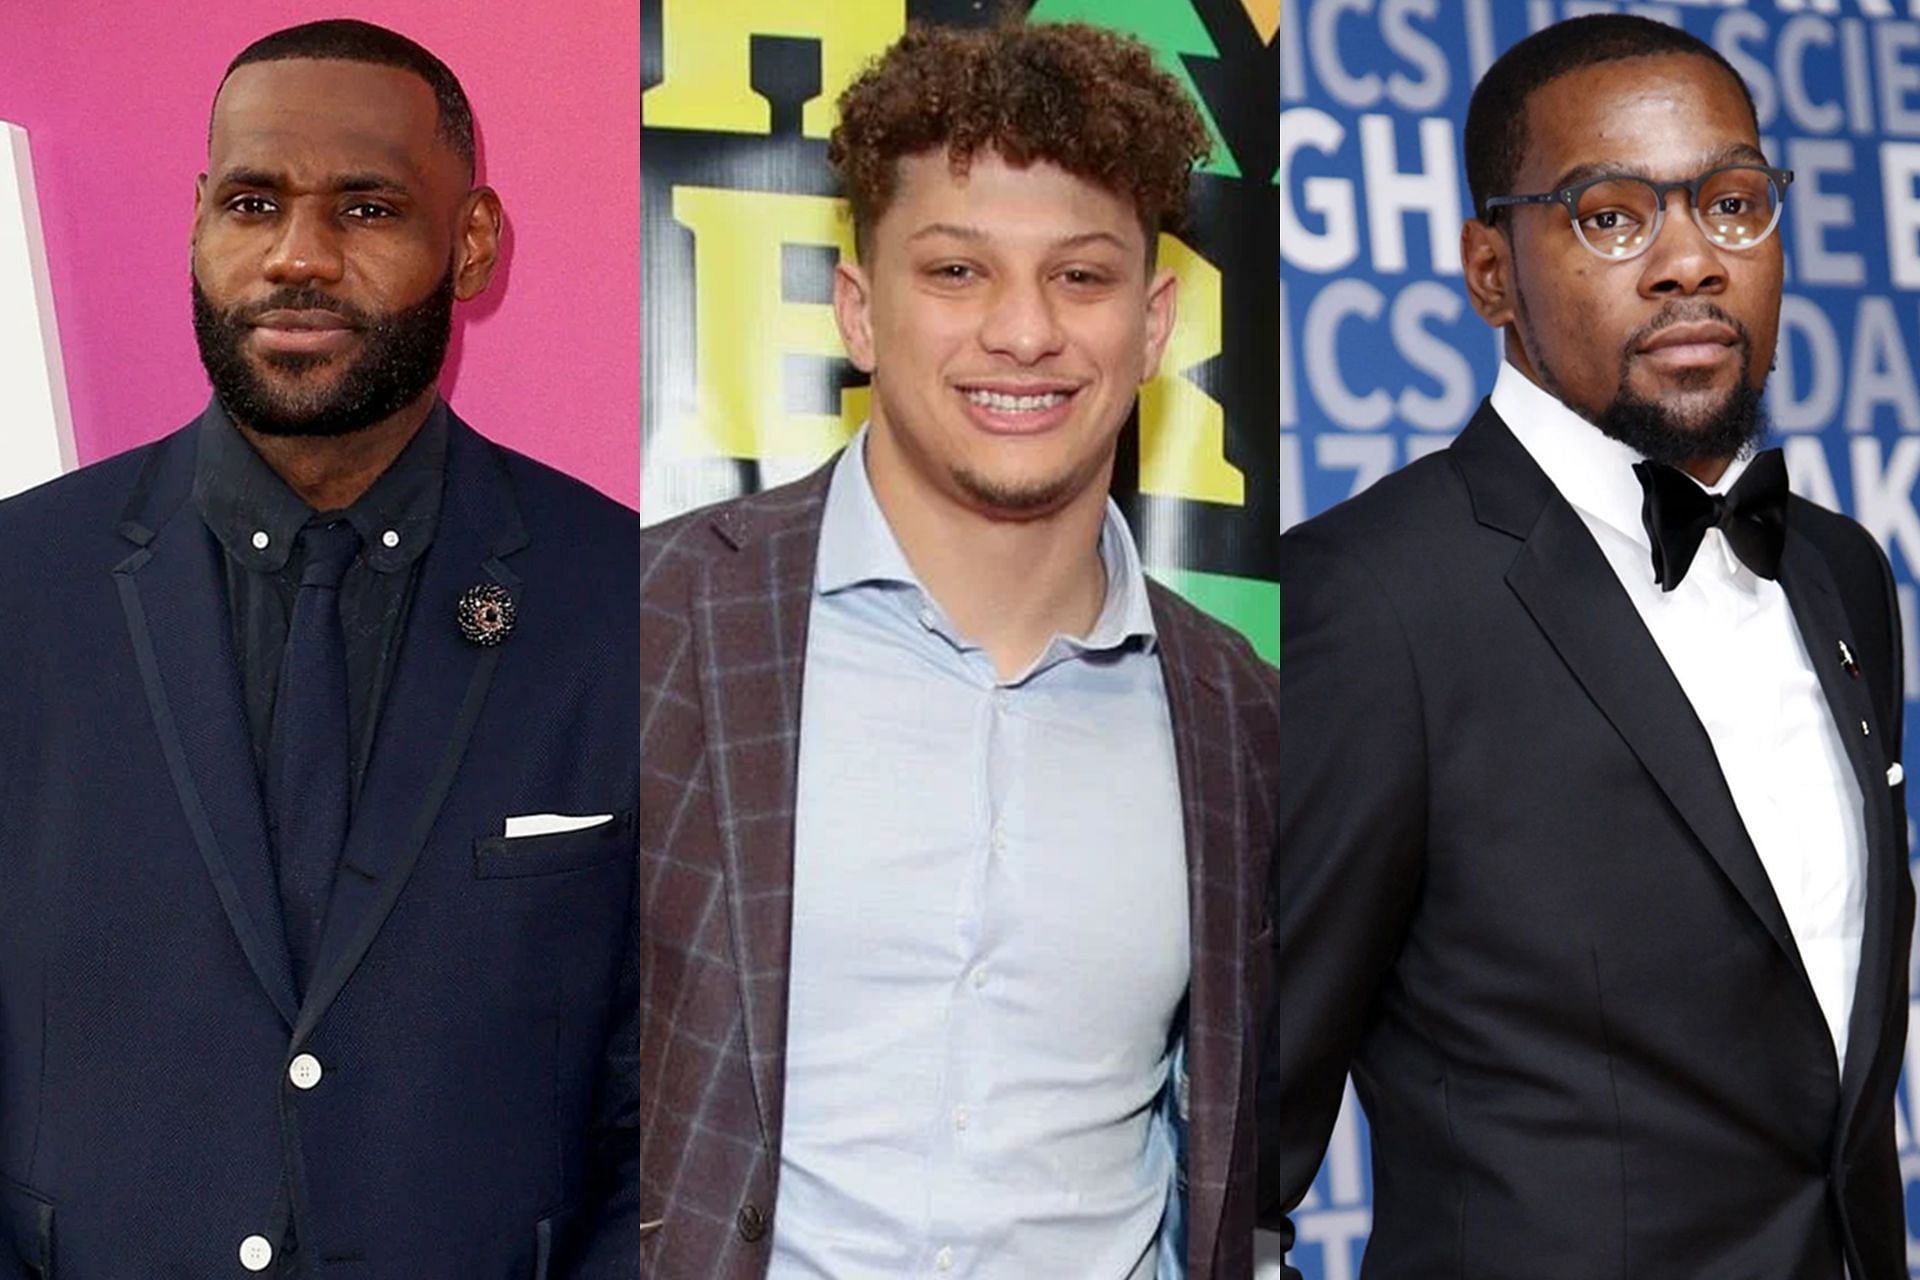 Spotted: Patrick Mahomes links up with LeBron James, Kevin Durant in star-studded party at Carbone Beach 